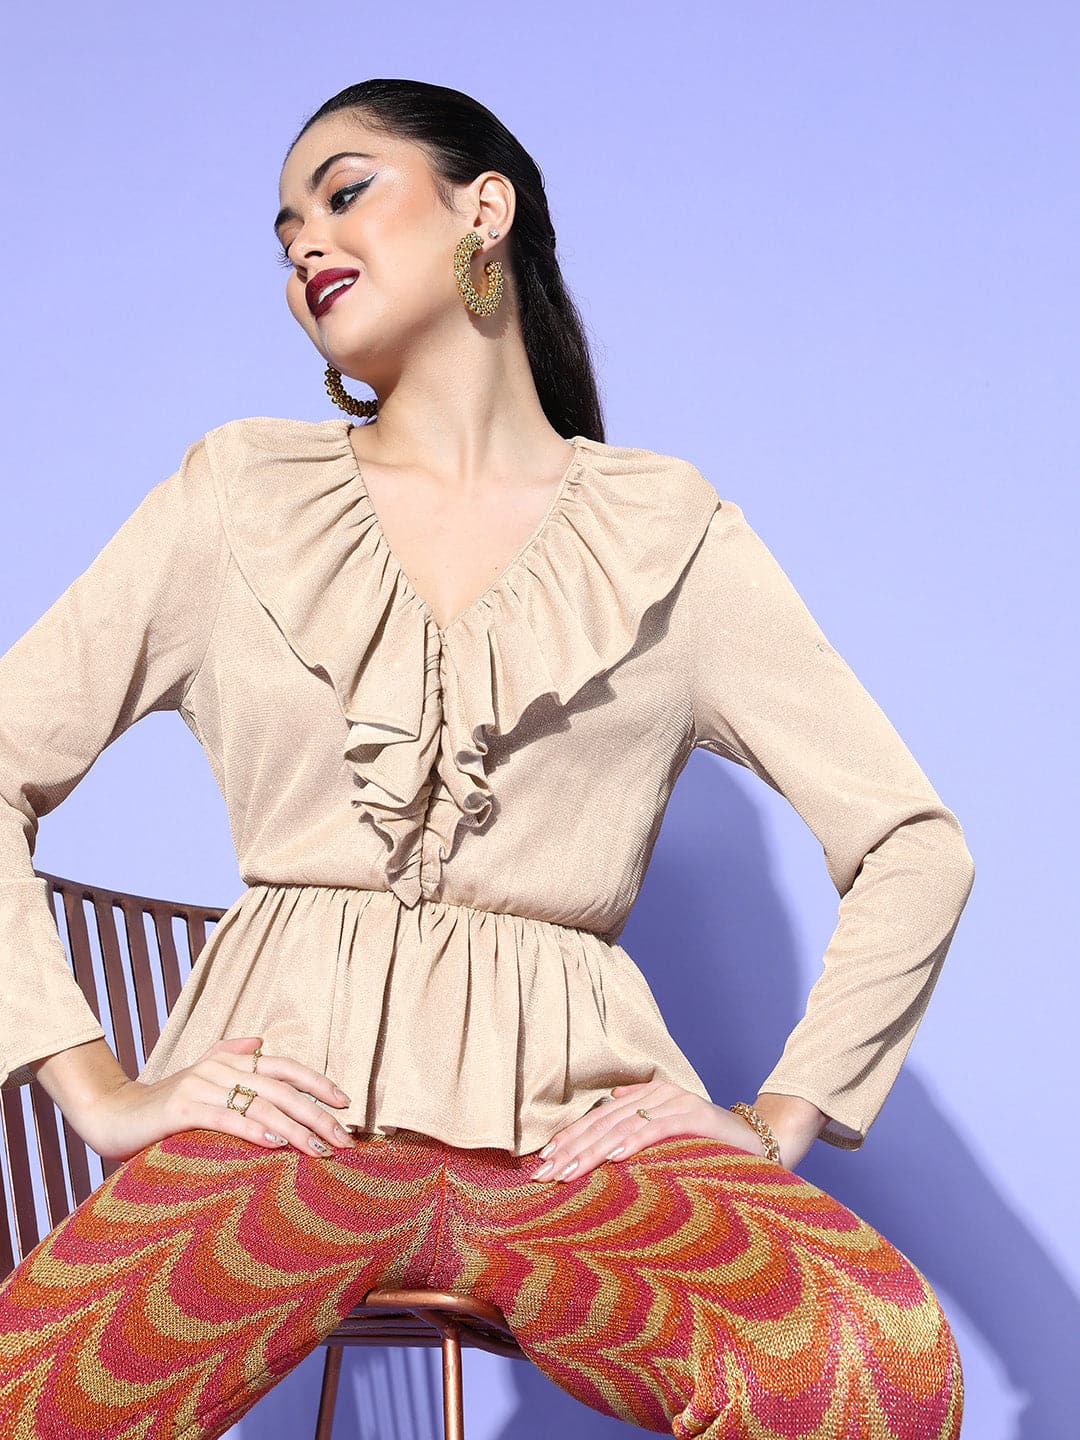 This Peplum Bell Sleeve Blouse with a ruffled hem takes Beige